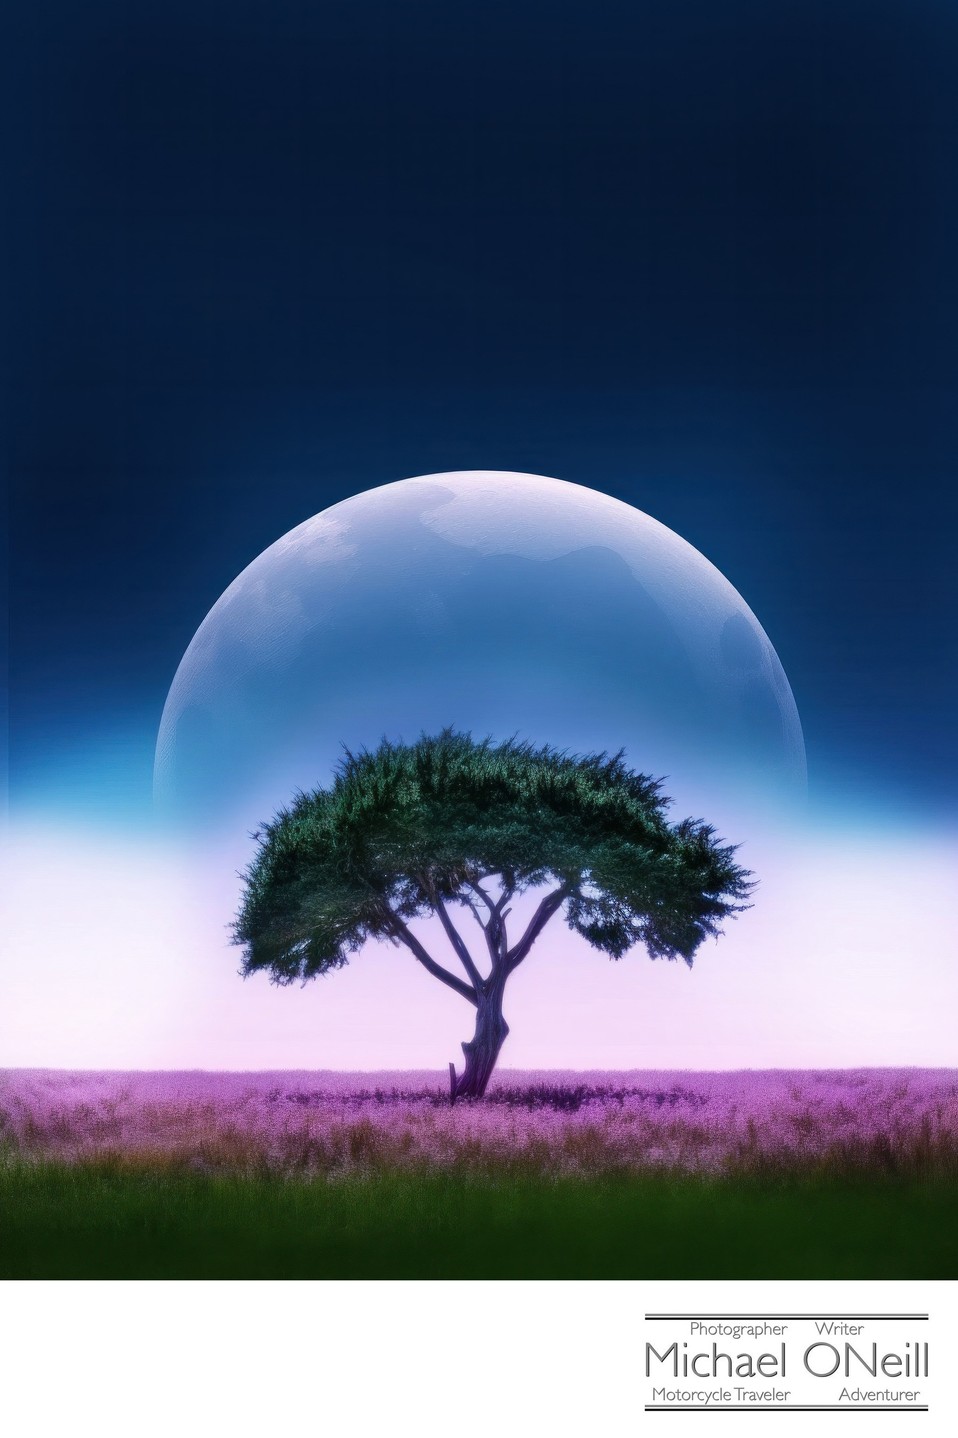 Lone Cypress Tree In A Field Of Lavender As The Moon Rises